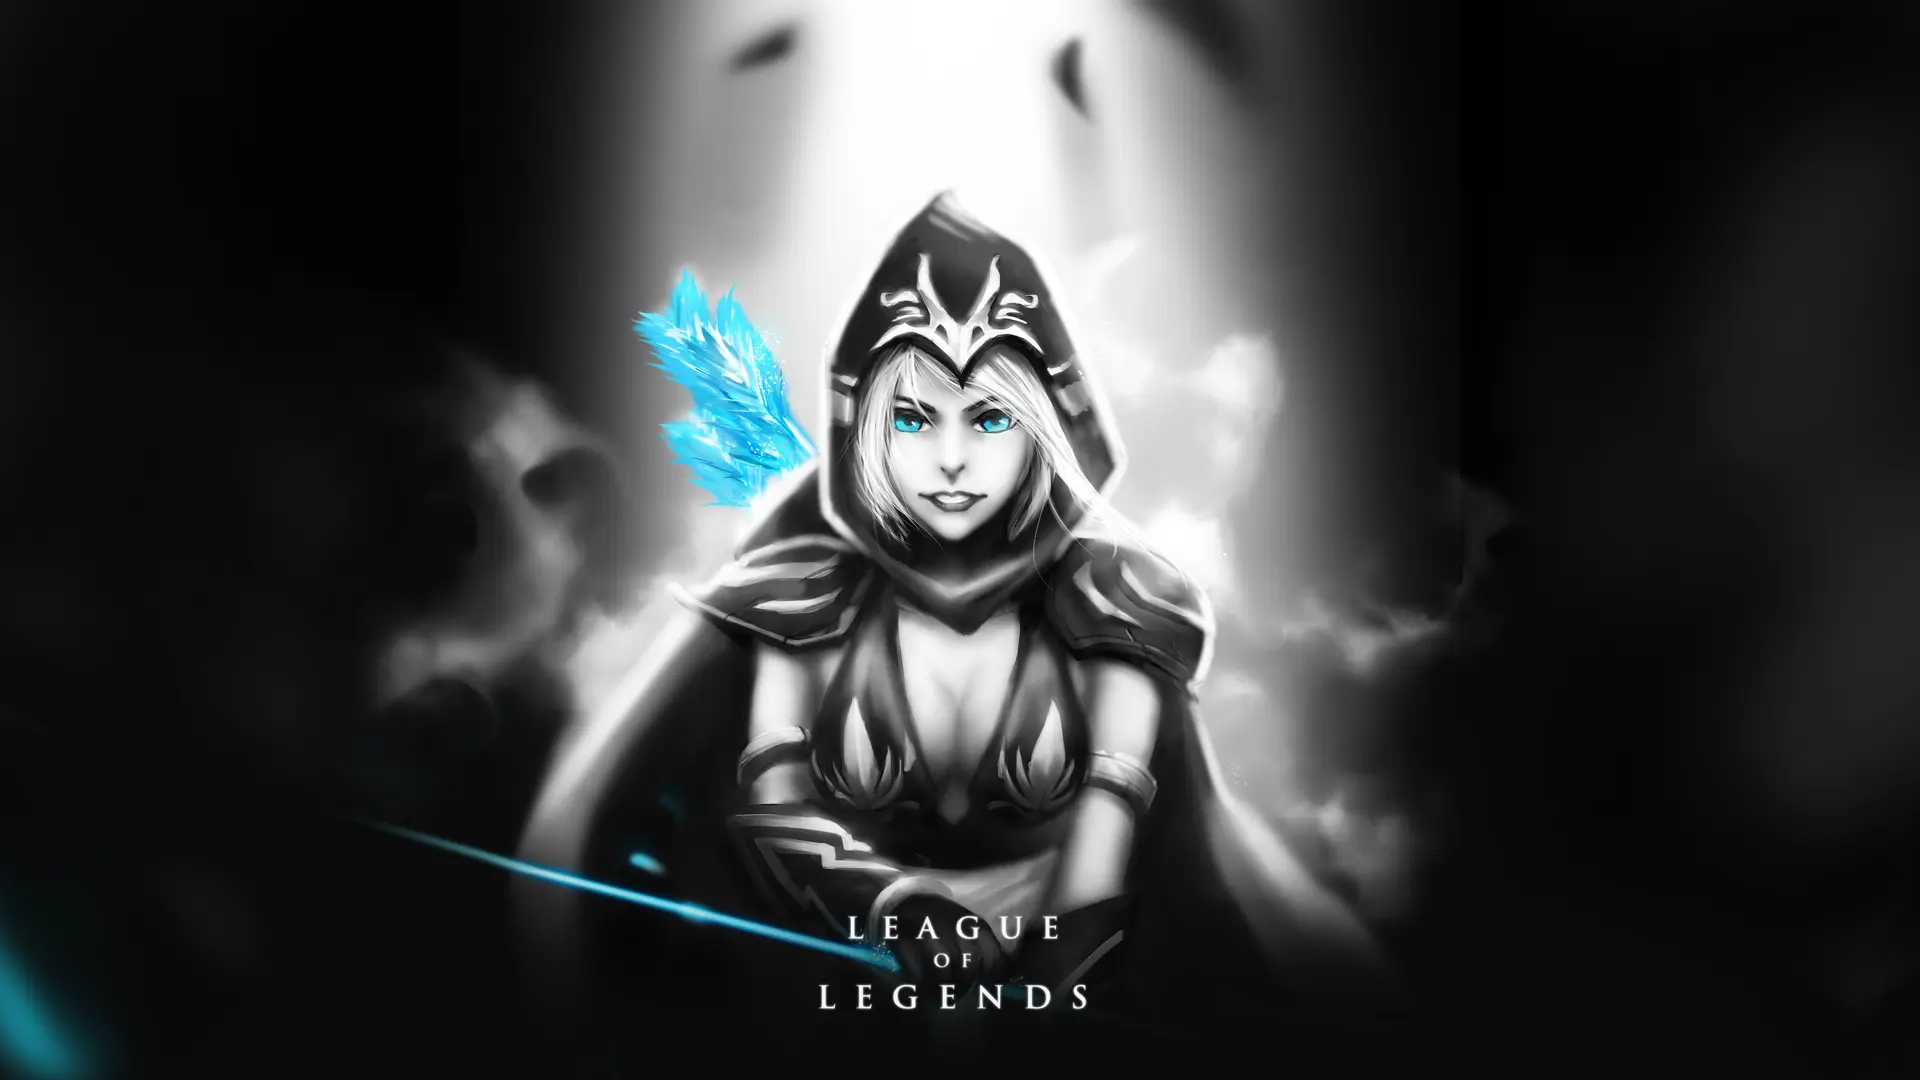 Game League of Legends wallpaper 102 | Background Image